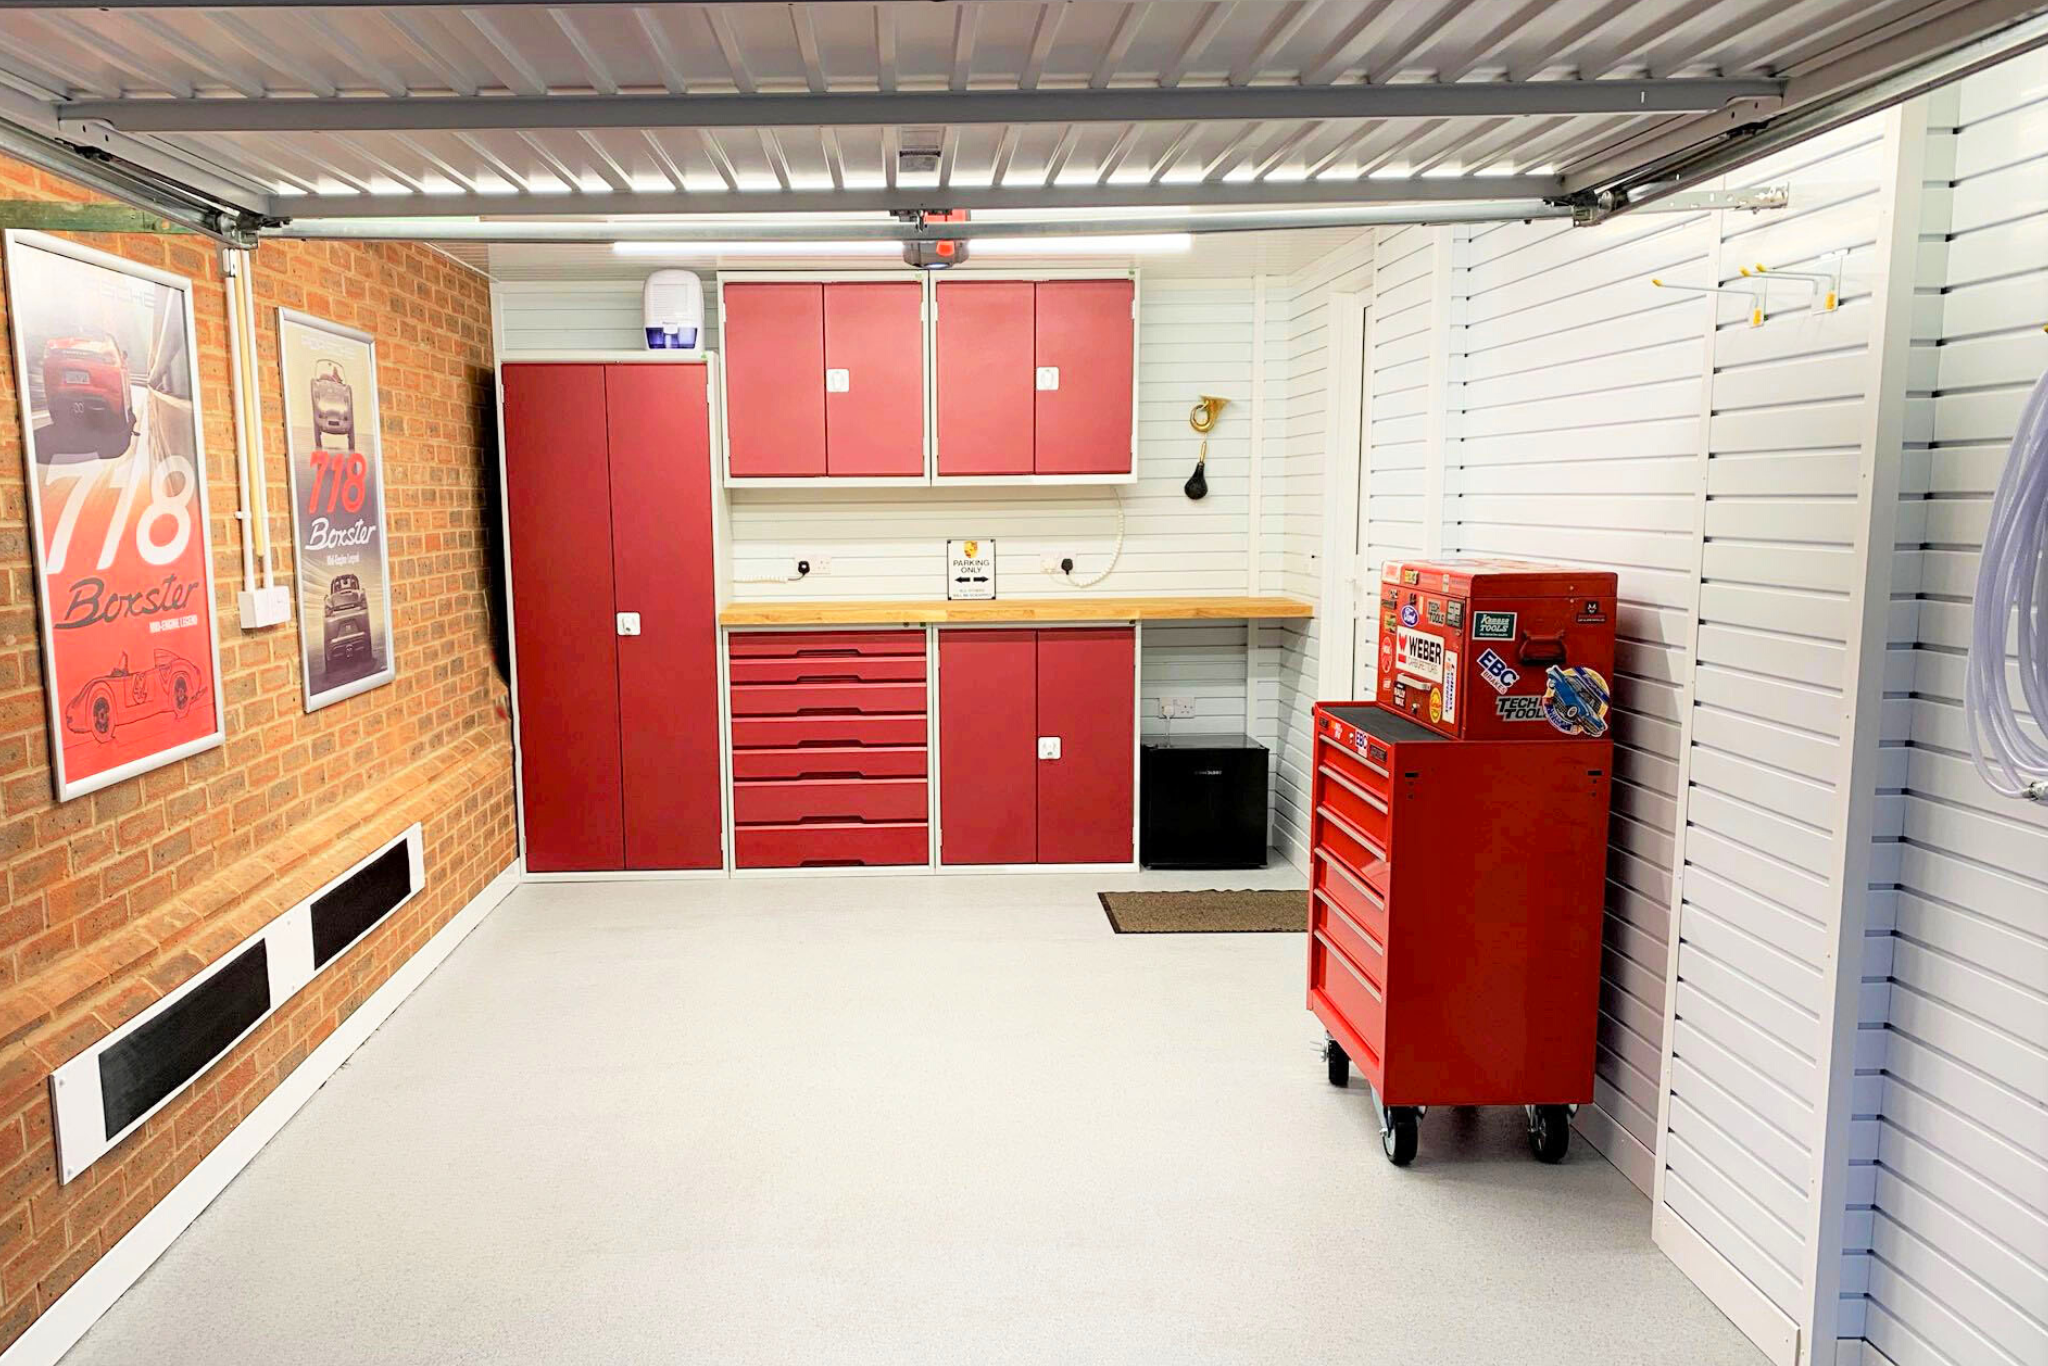 A luxurious resin coating, beautifully seamless for the garage floor